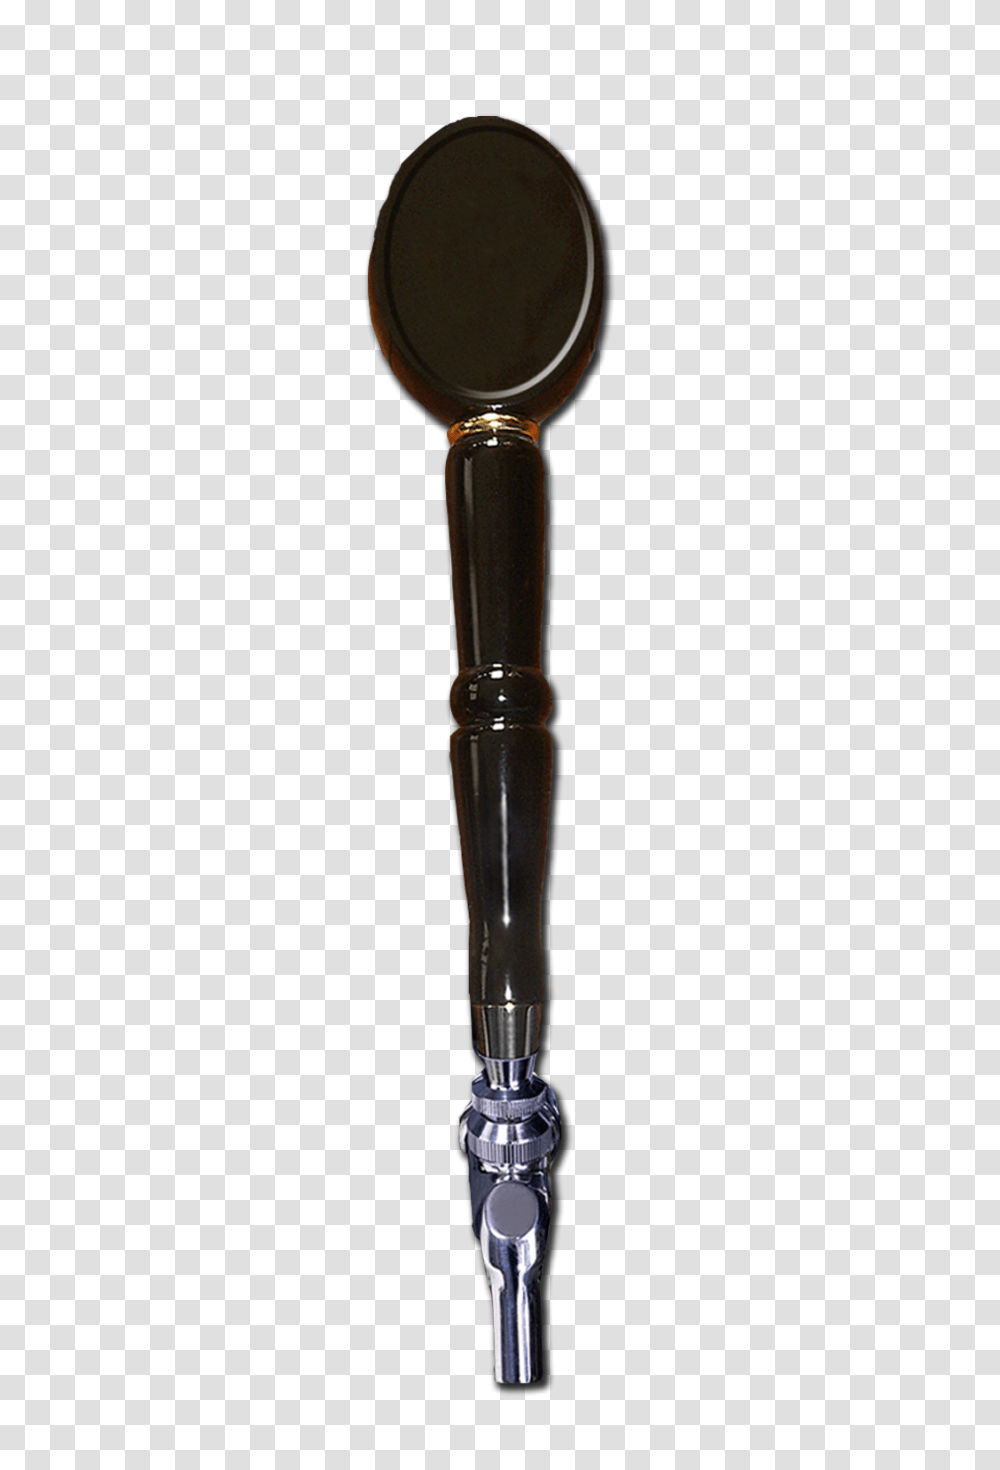 The Divide Bar Grill Billings Mt Brewery Pub Microbrew, Apparel, Weapon, Weaponry Transparent Png